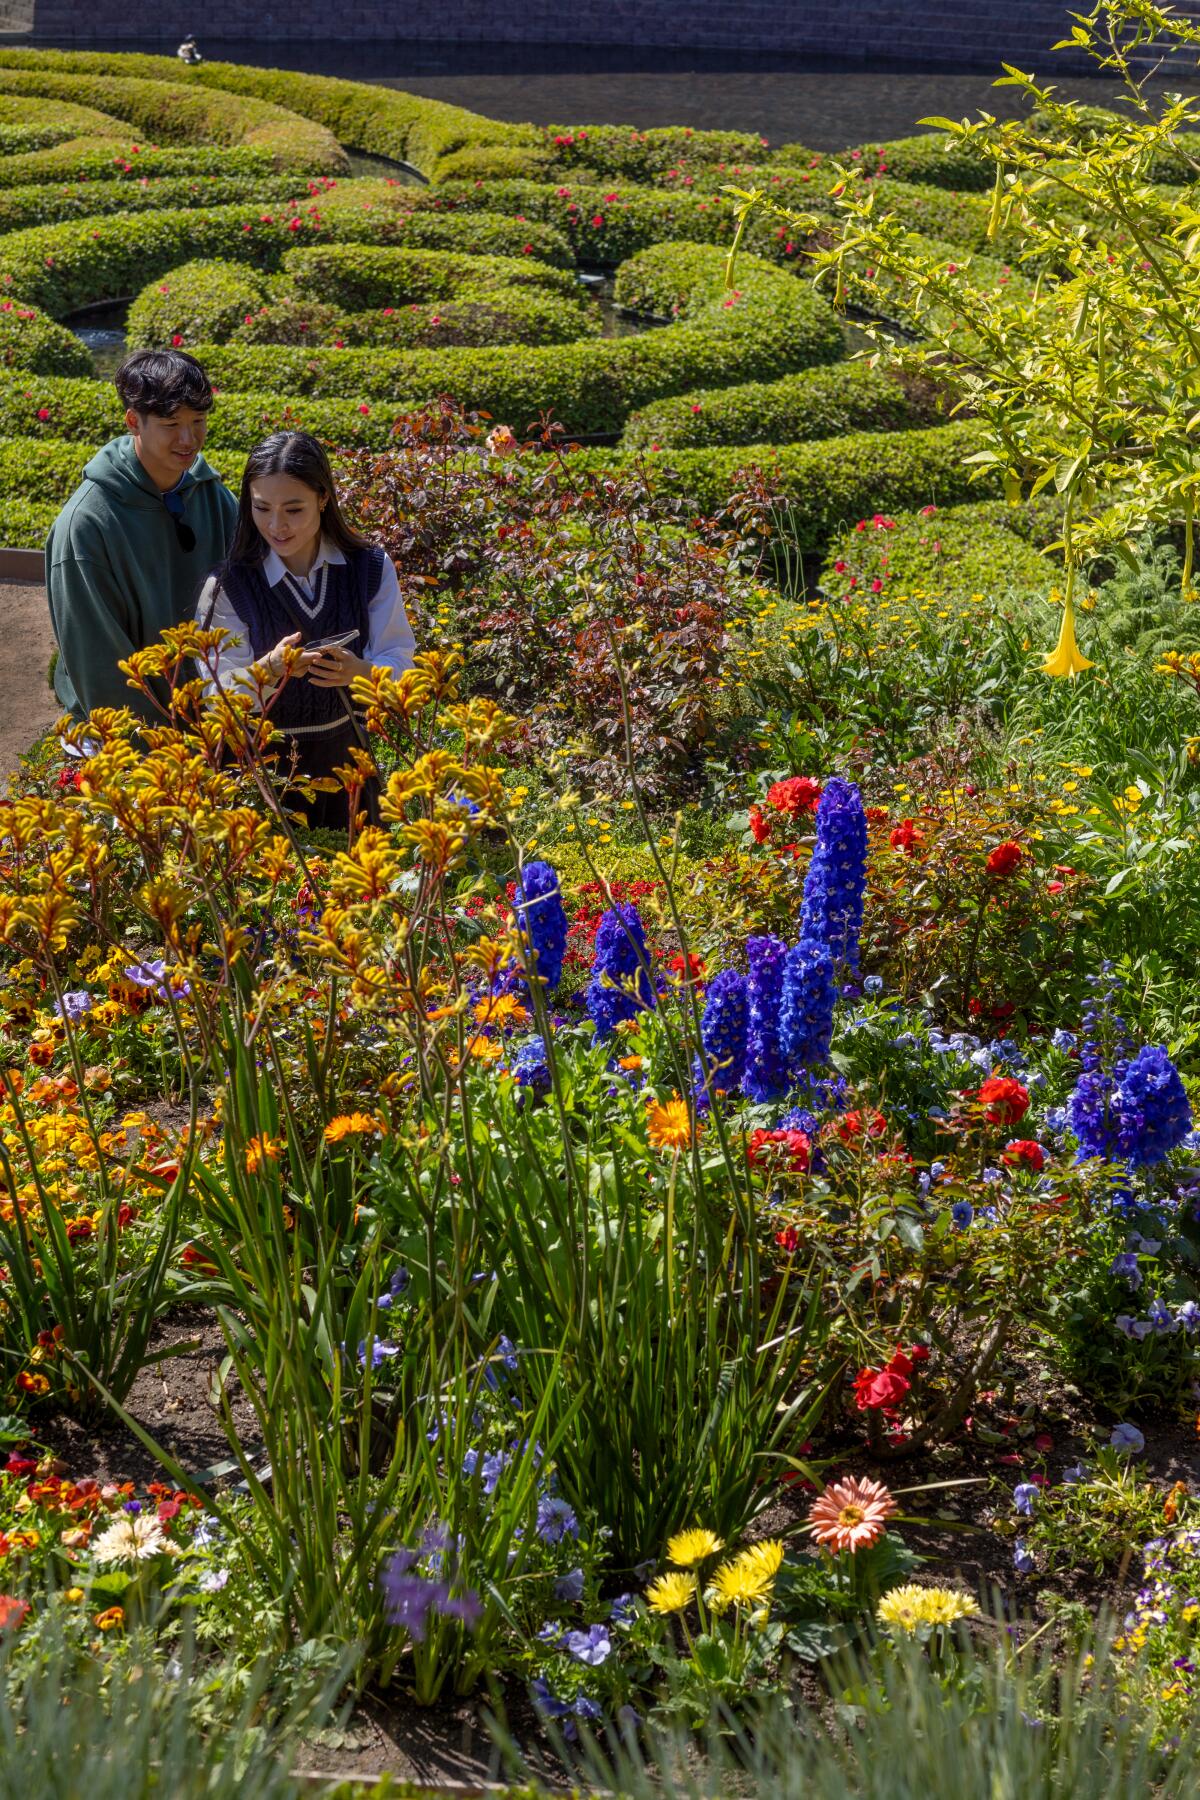 Two people walk among the flowers in bloom at the "Central Garden."